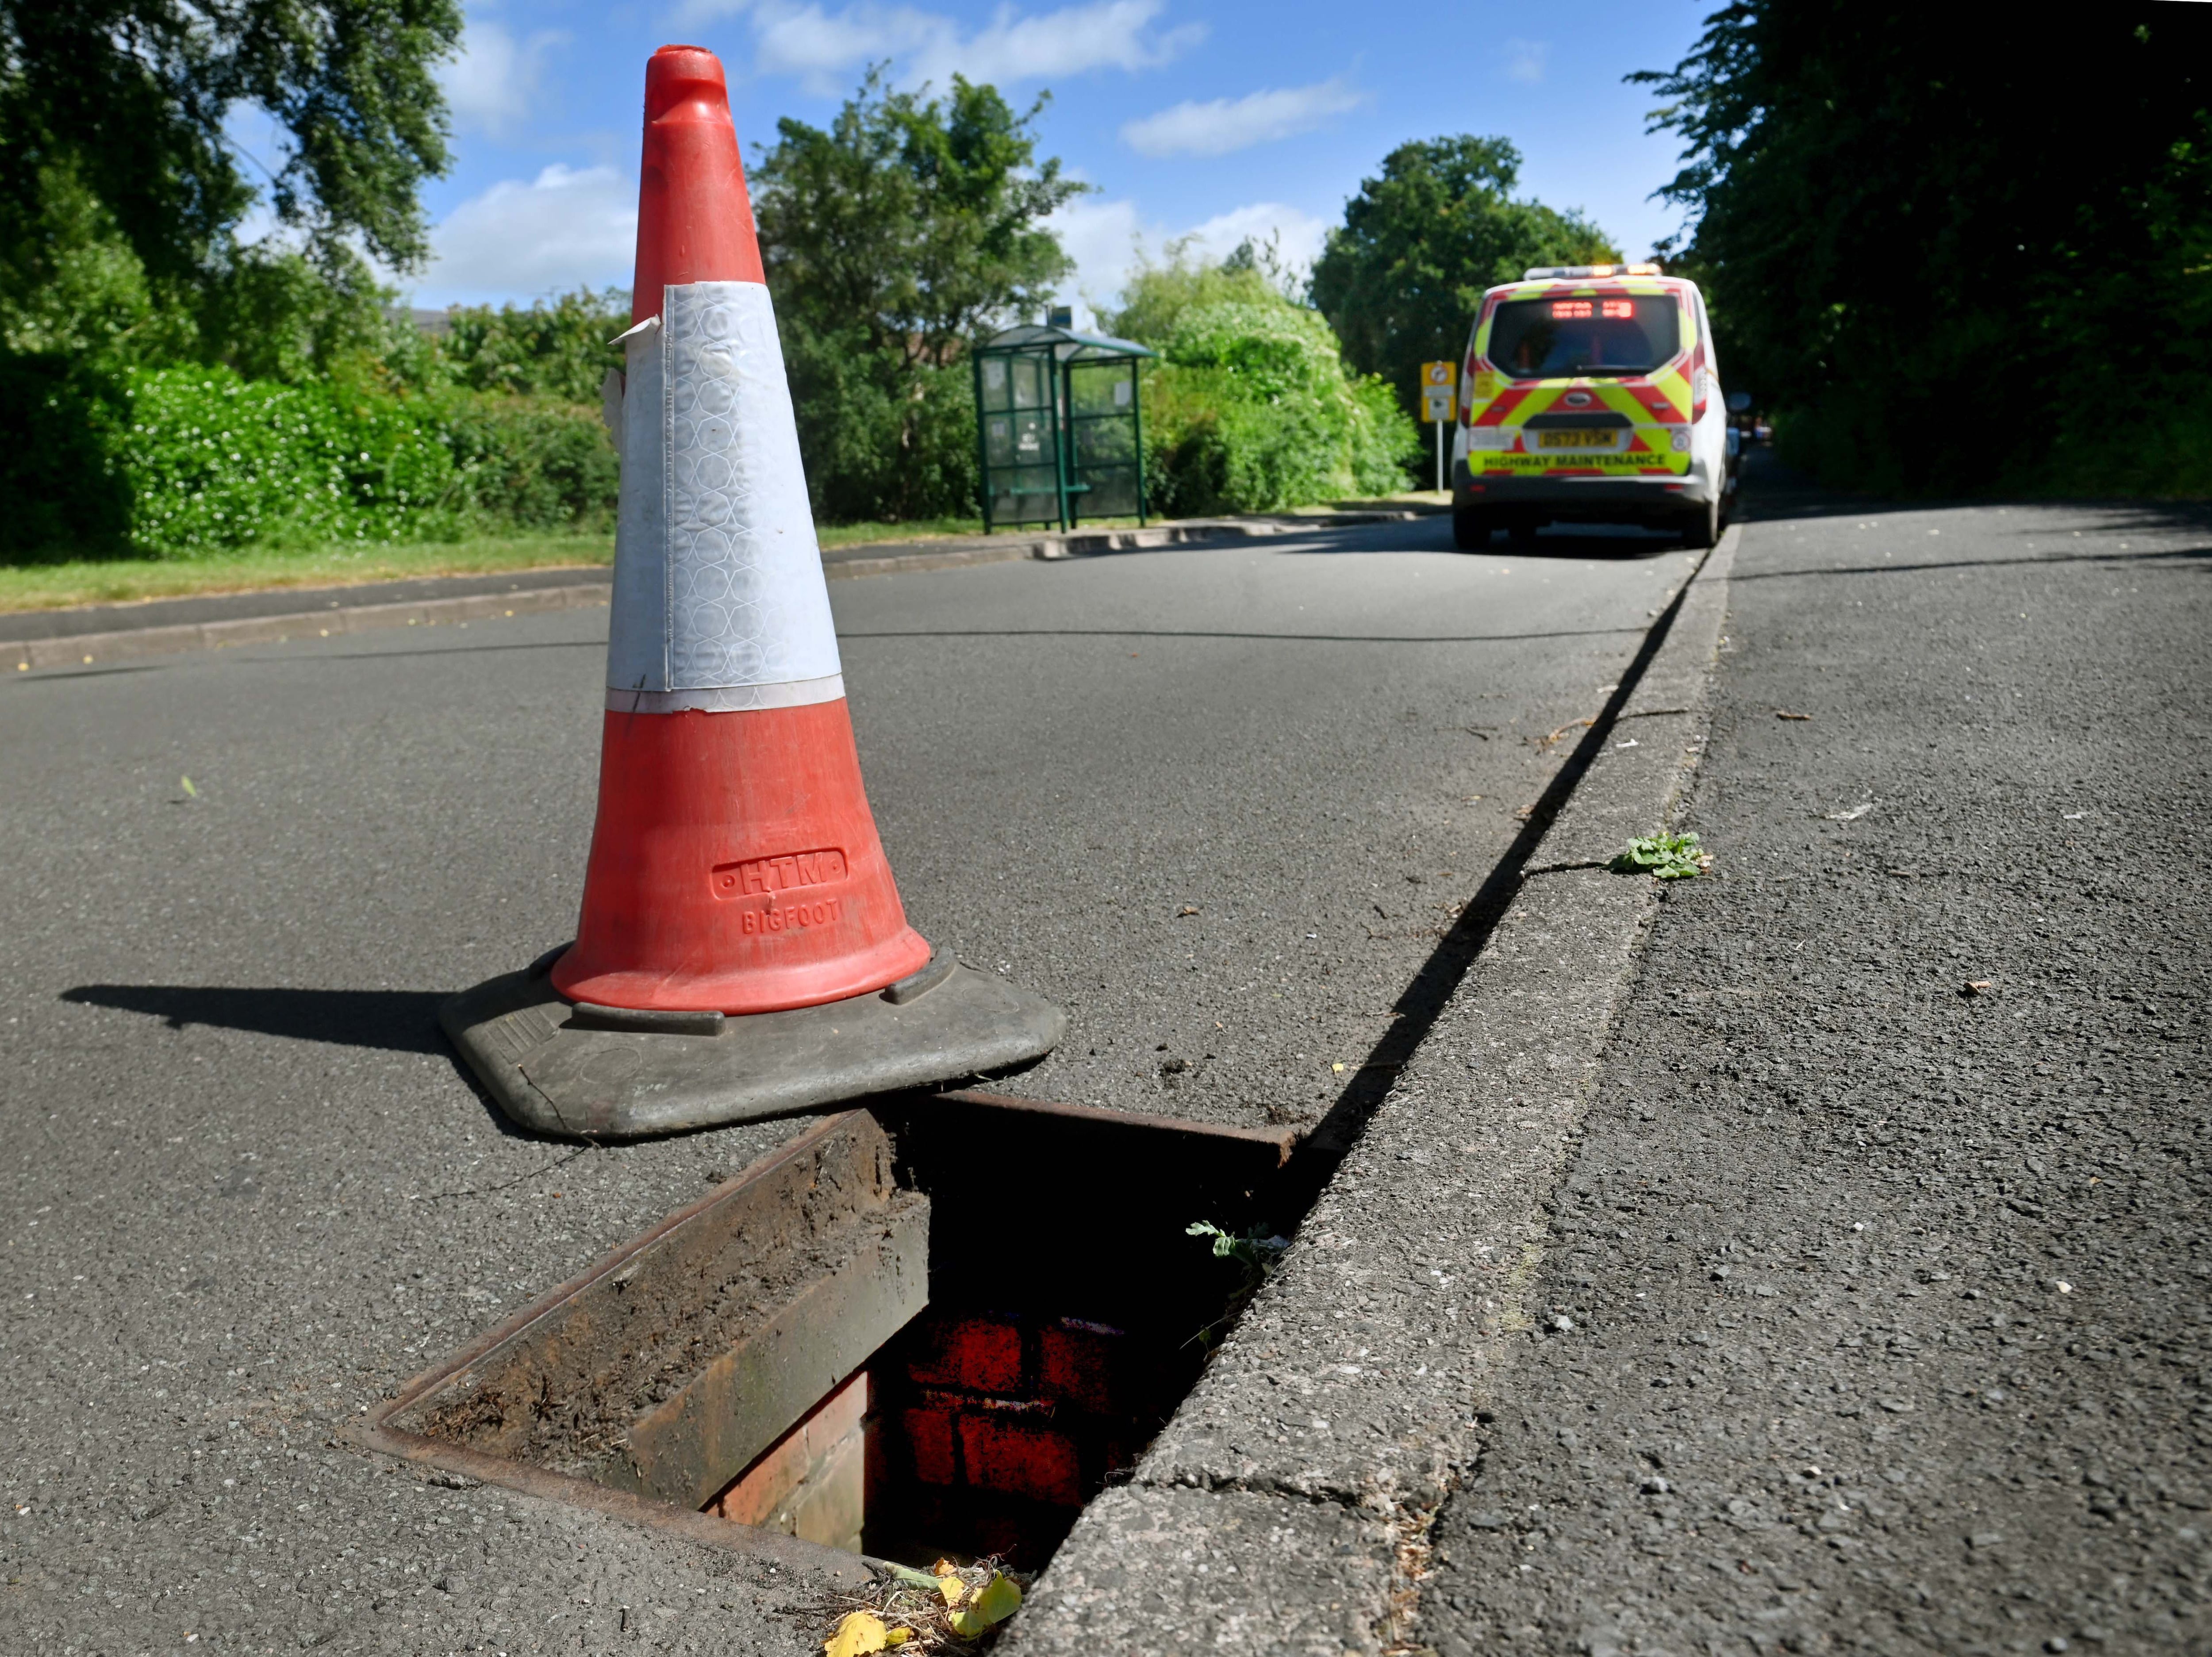 Police investigating spate of manhole cover thefts in Shropshire and Staffordshire